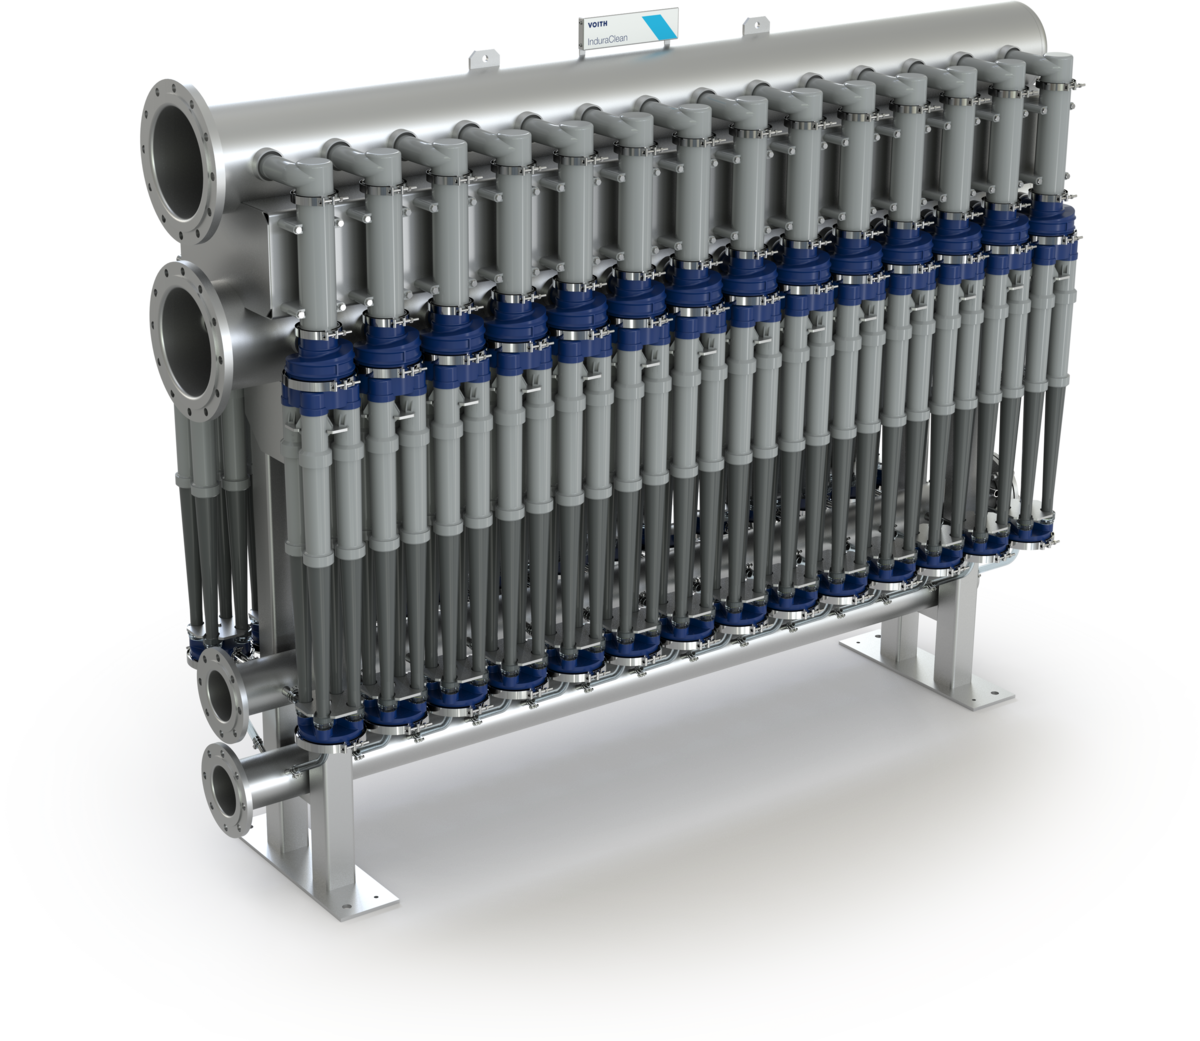 The modular, robust and optimized design of the new InduraClean IDC-4 can lead to significantly increased production, energy reduction of up to 50 percent or significantly improved separation efficiency, depending on customer  equirements.